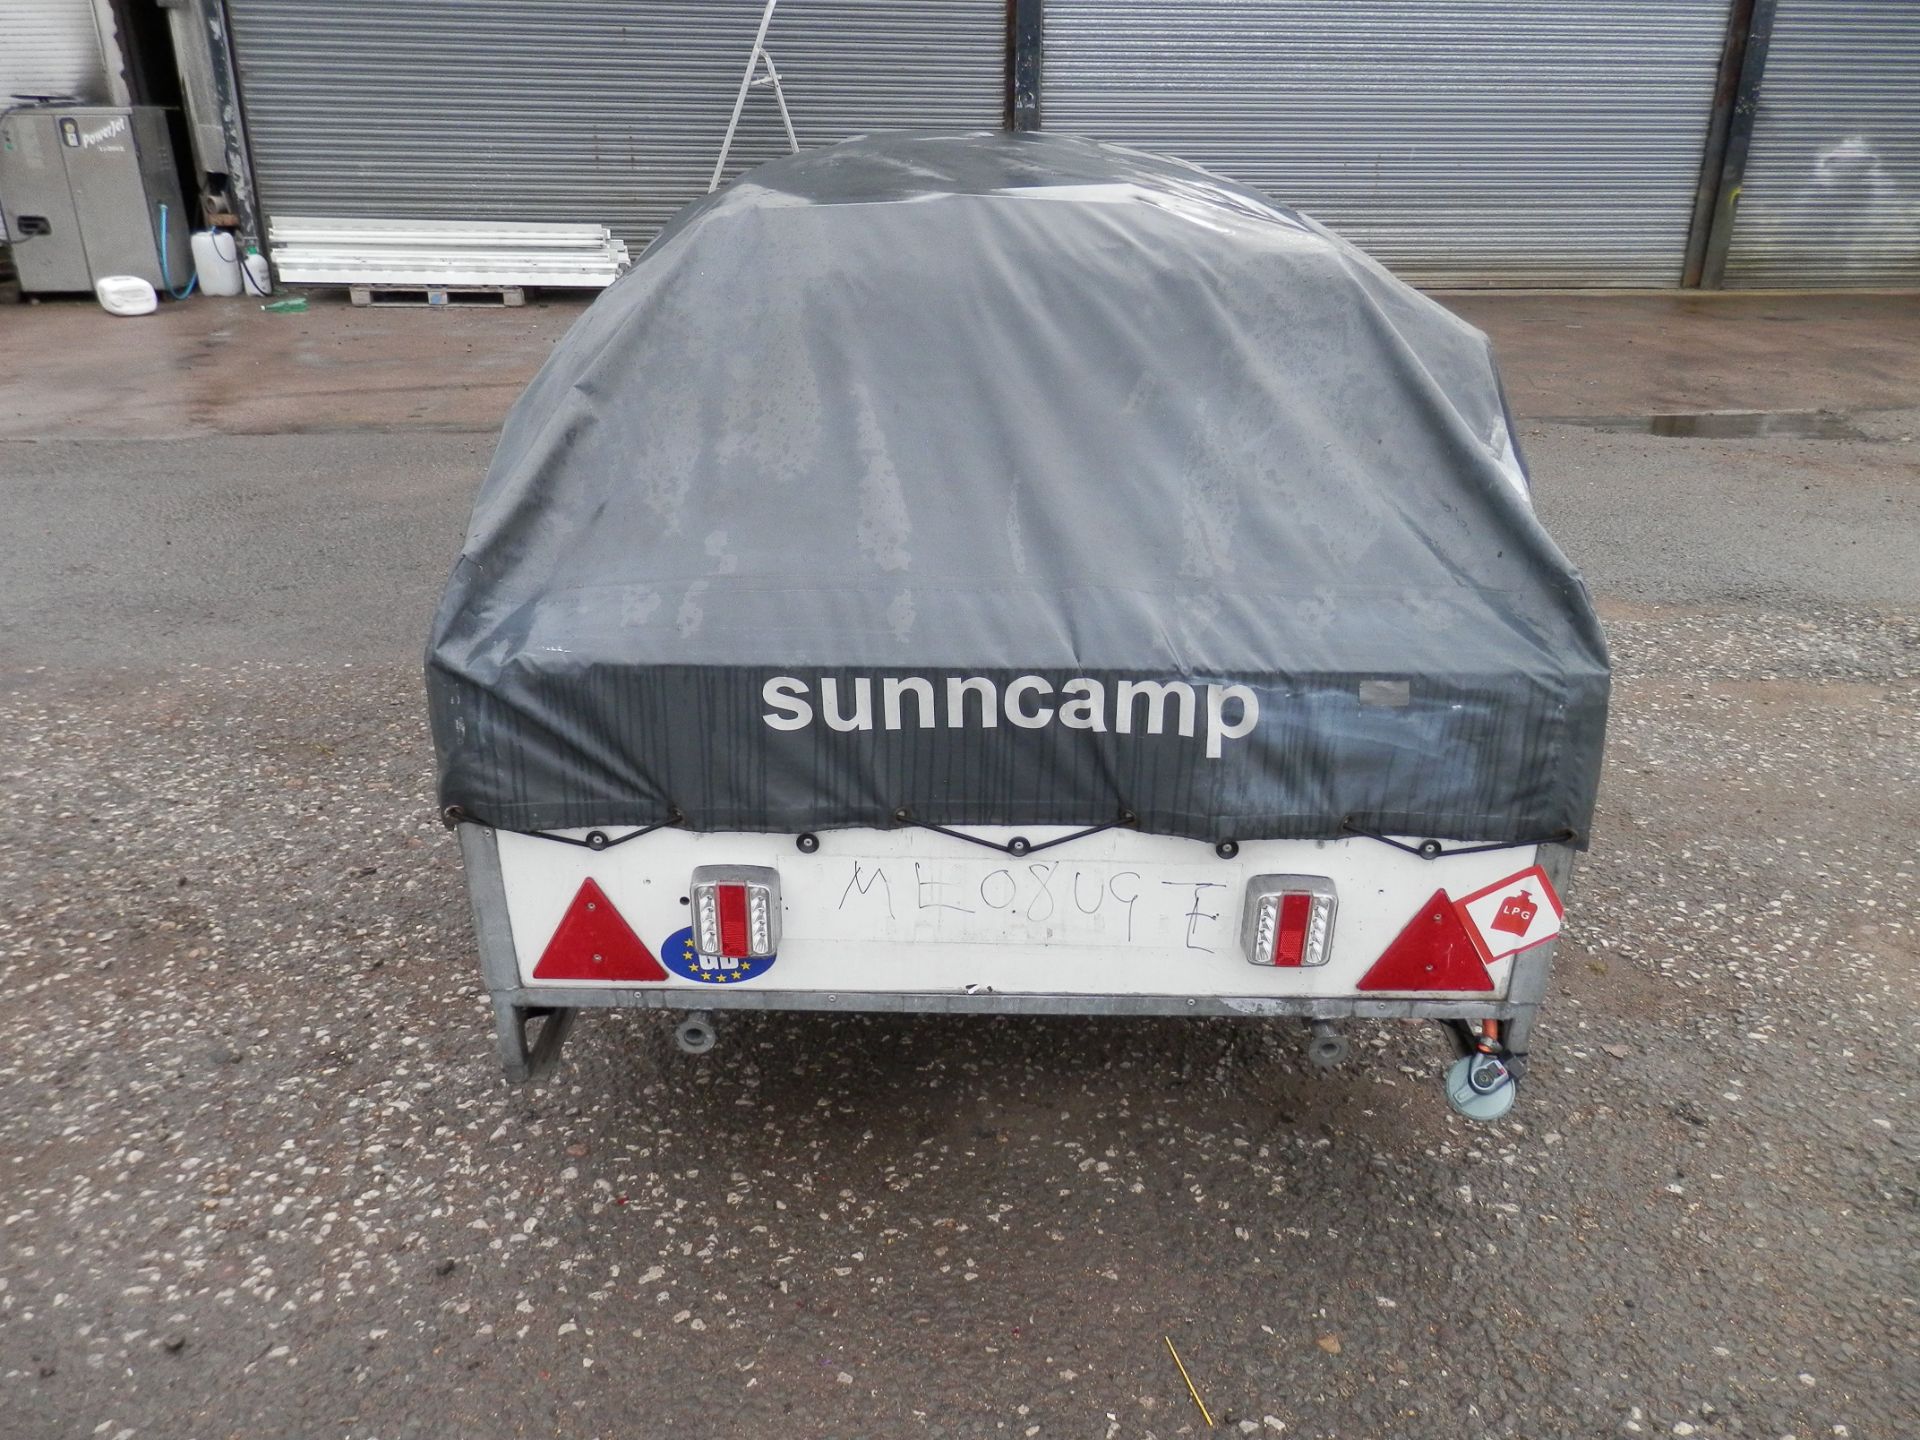 SUNNCAMP 350SE 4 BERTH TRAILER TENT WITH SINK & GAS CONNECTION POINT. LATE ENTRY TO CLEAR !! - Image 3 of 13